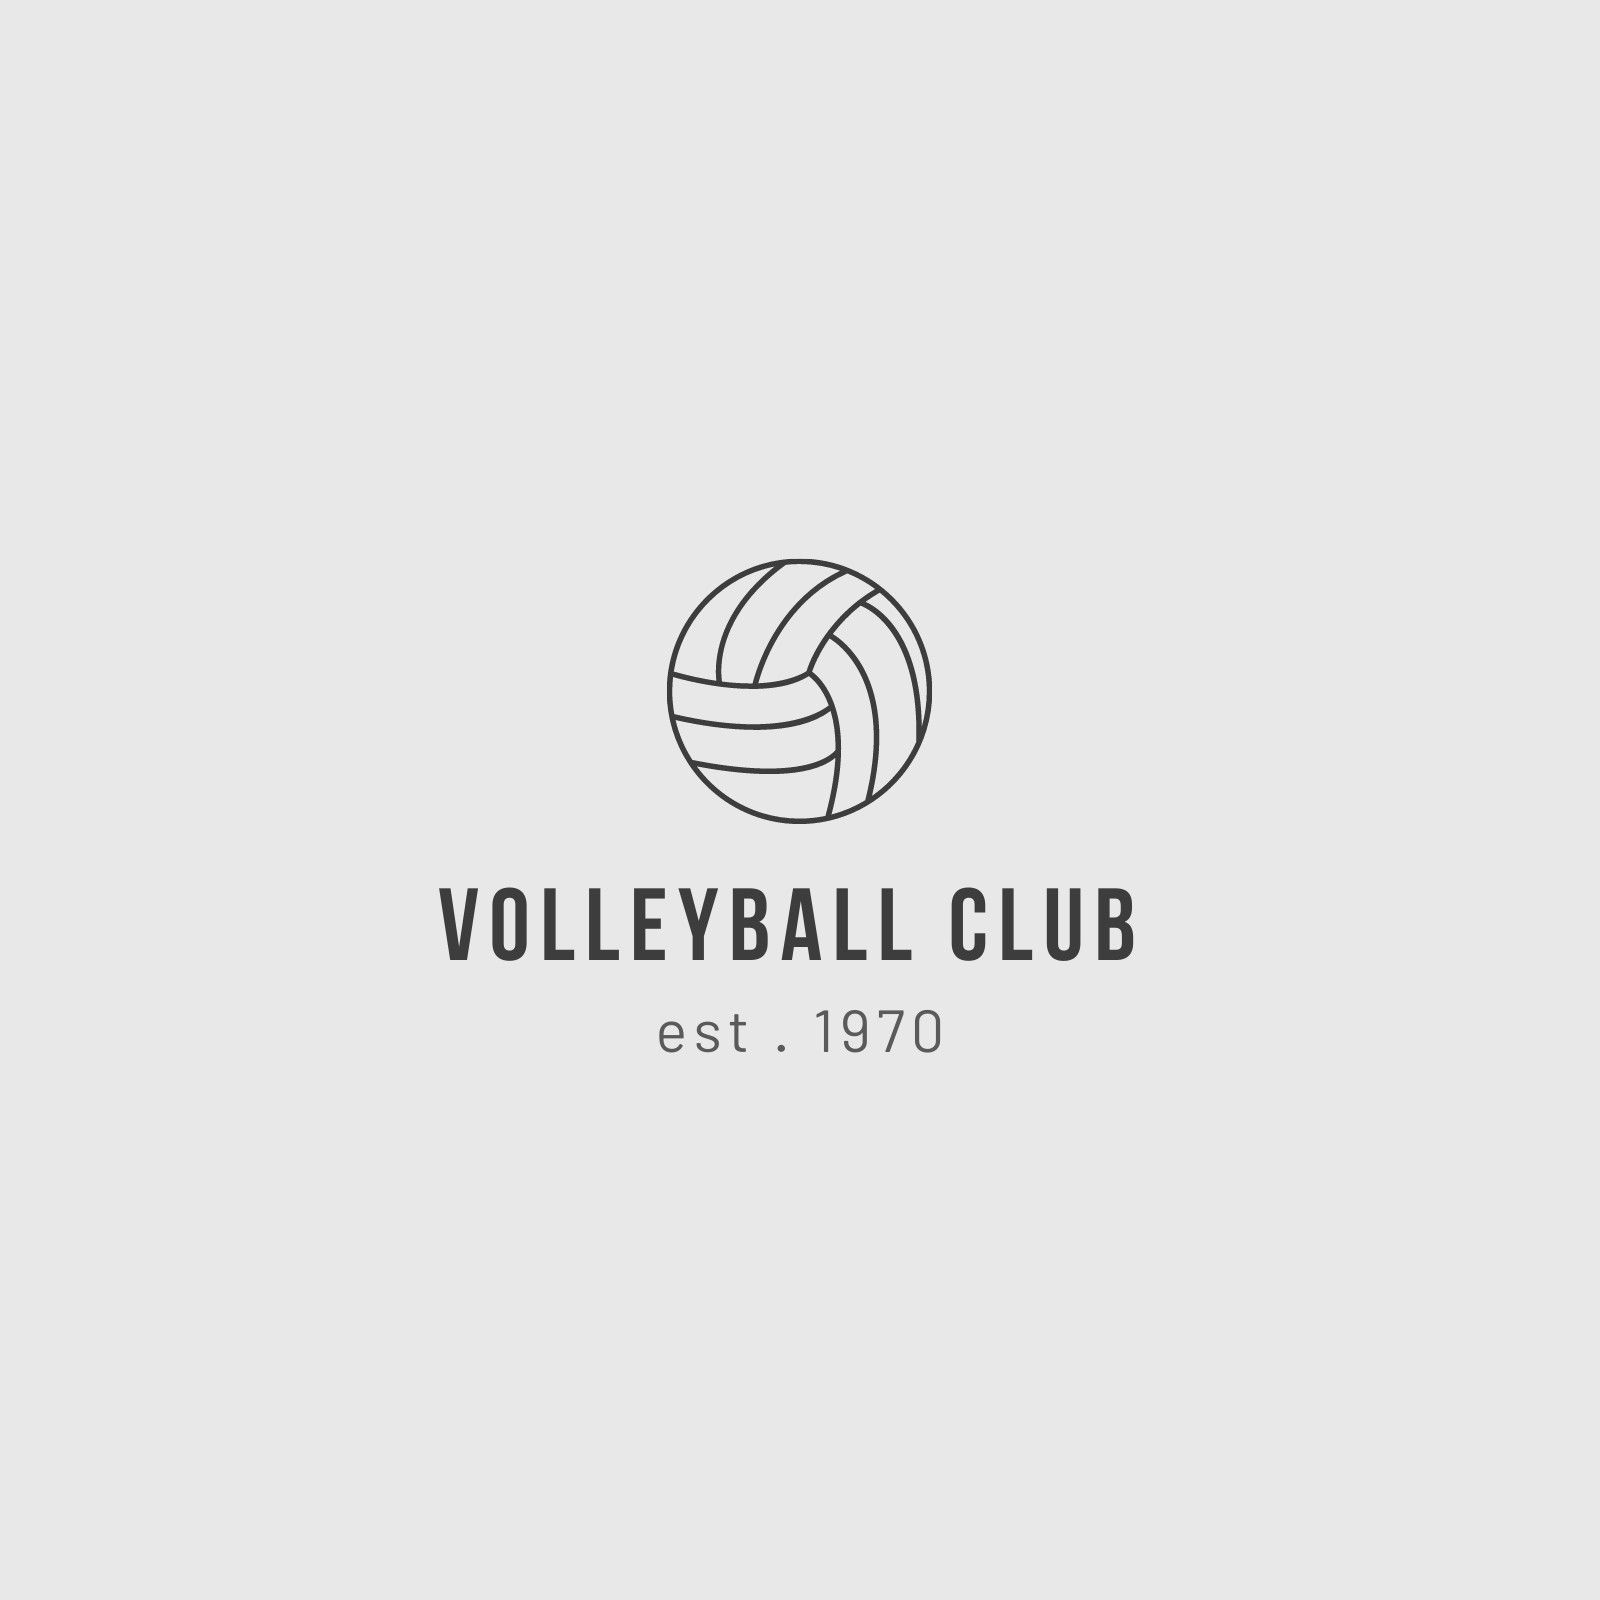 Volleyball logo design for a sports club - Volleyball